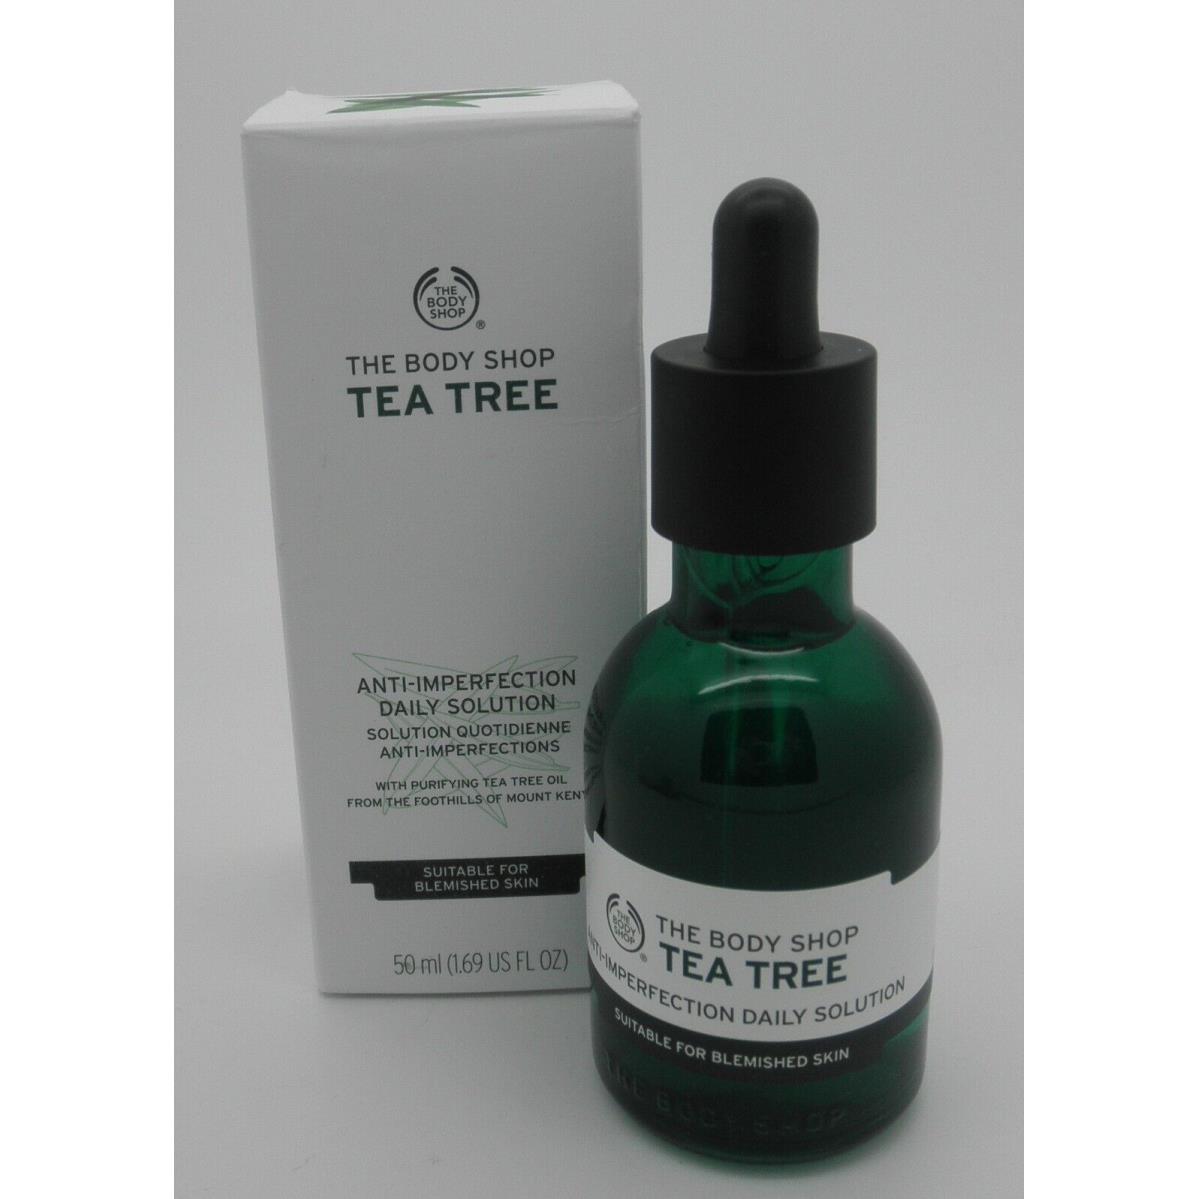 The Body Shop Tea Tree Anti-imperfection Daily Solution 1.69 oz